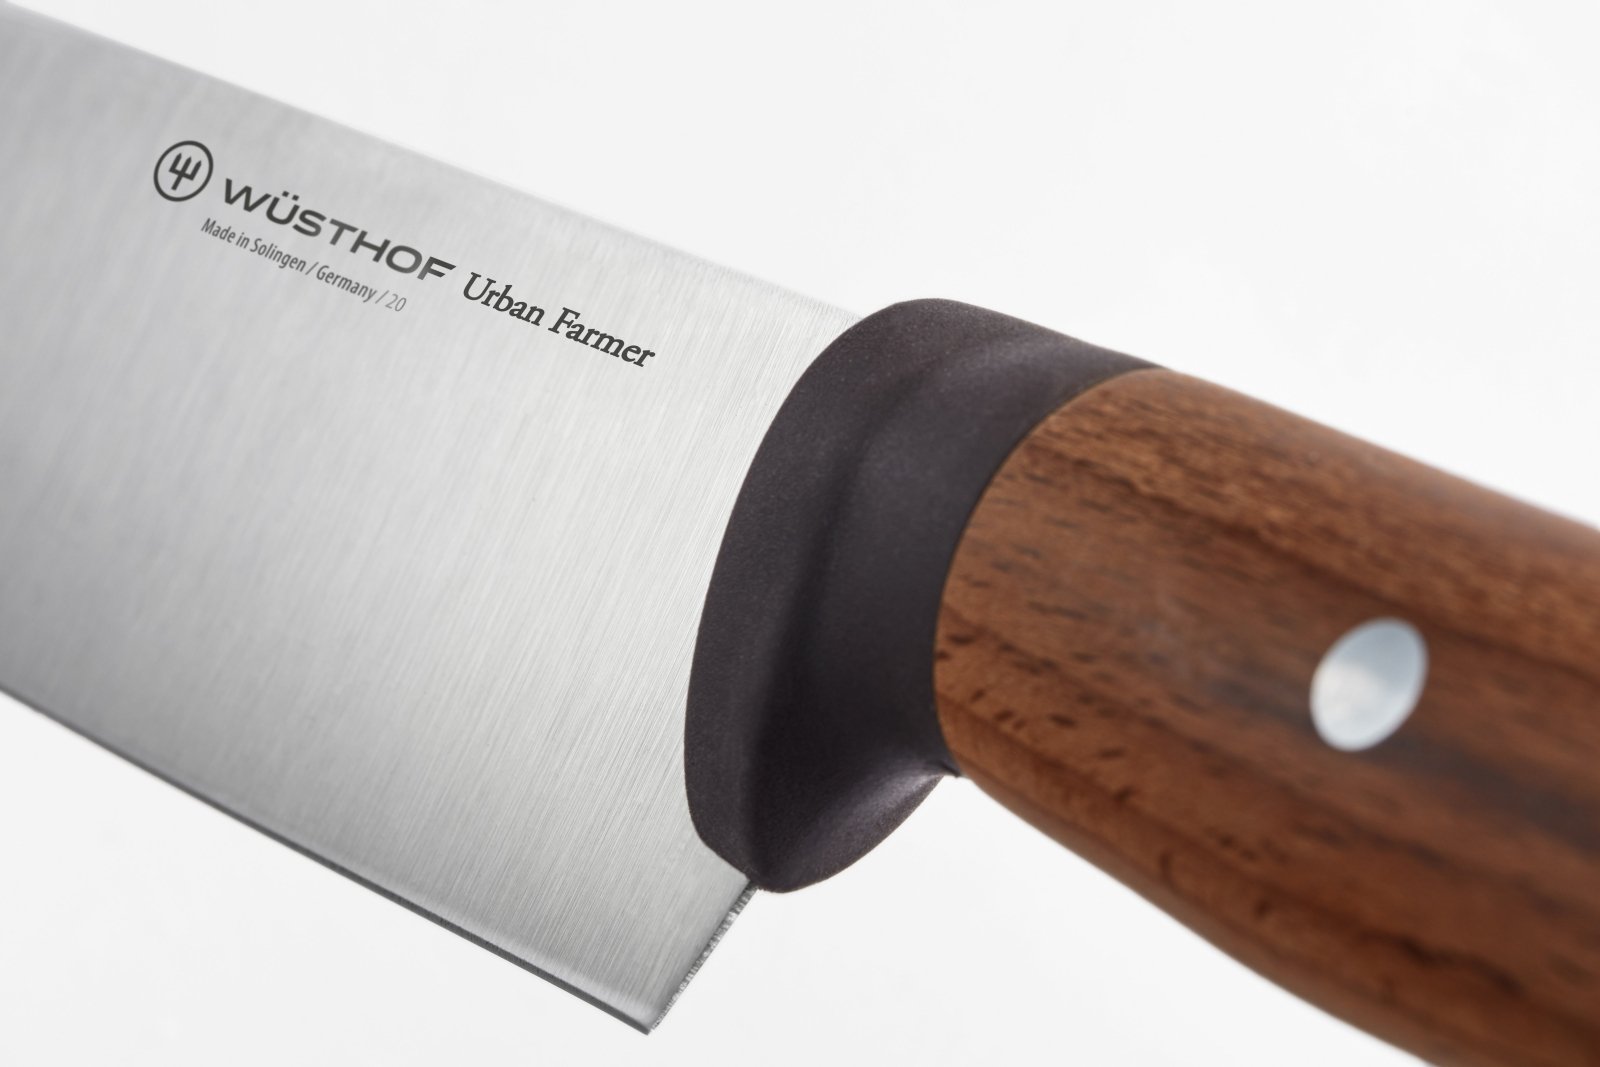 Wusthof Urban Farmer Cook‘s Knife 20cm - 1025244820 - The Cotswold Knife Company